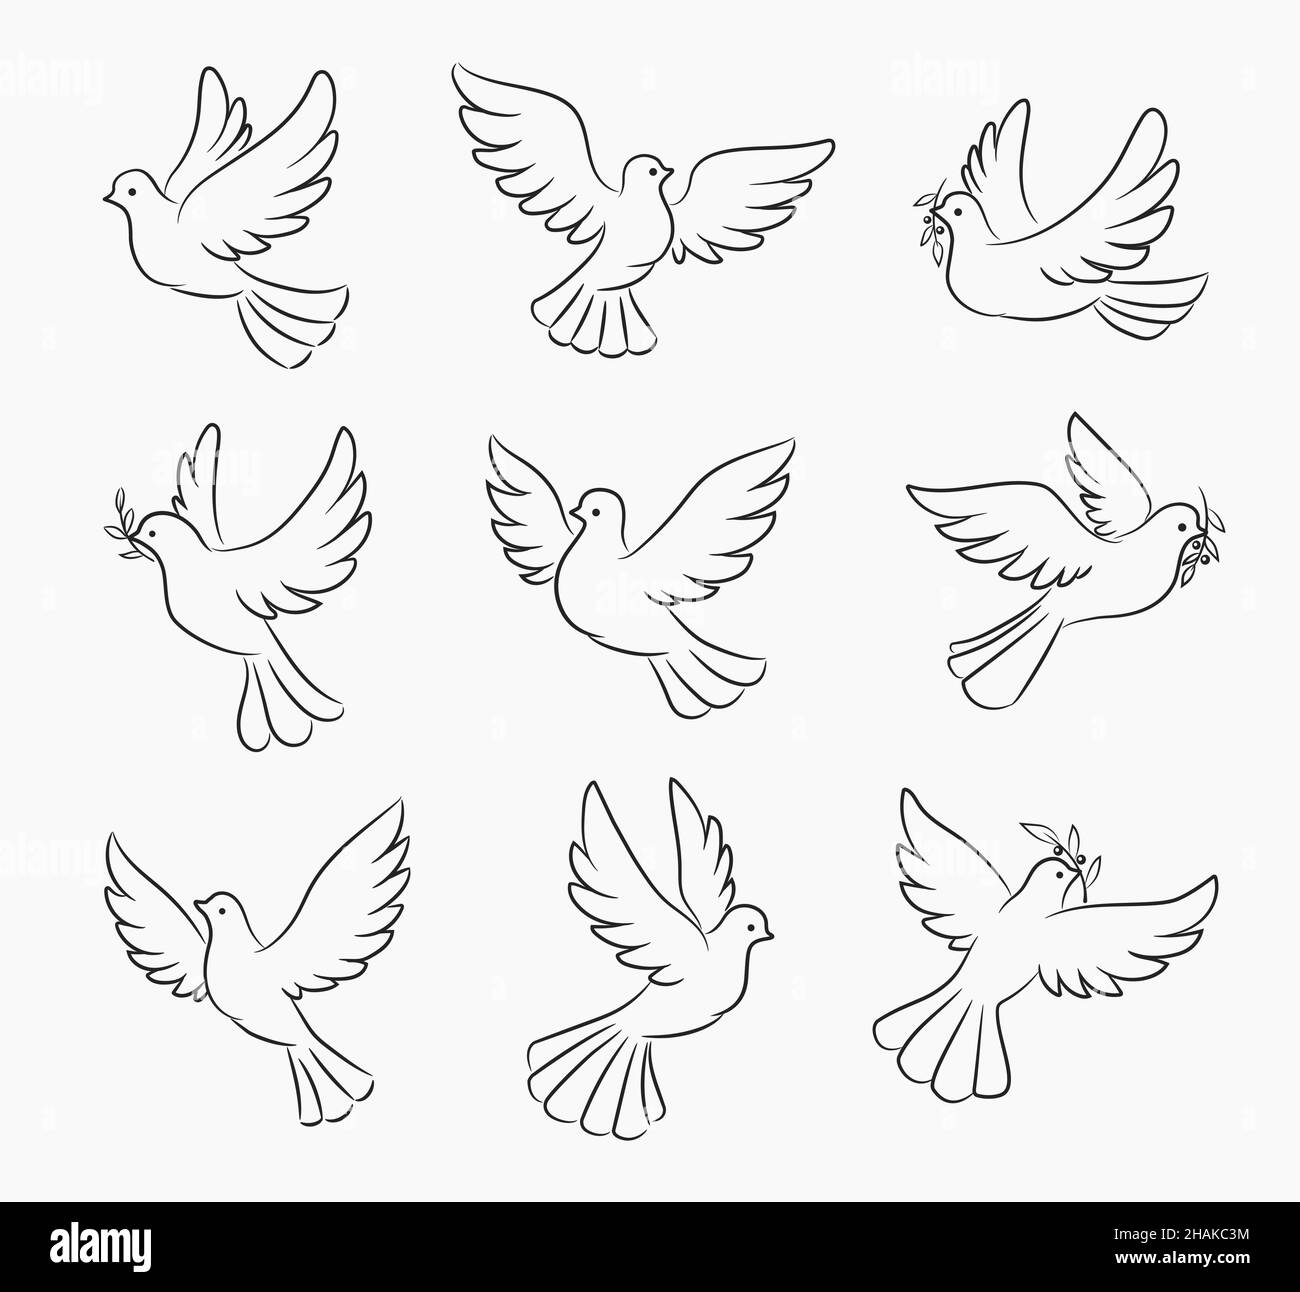 Christmas dove and pigeon bird vector silhouettes of Xmas tree decorations. Christian religion symbols of peace, hope and love, doves flying with oliv Stock Vector